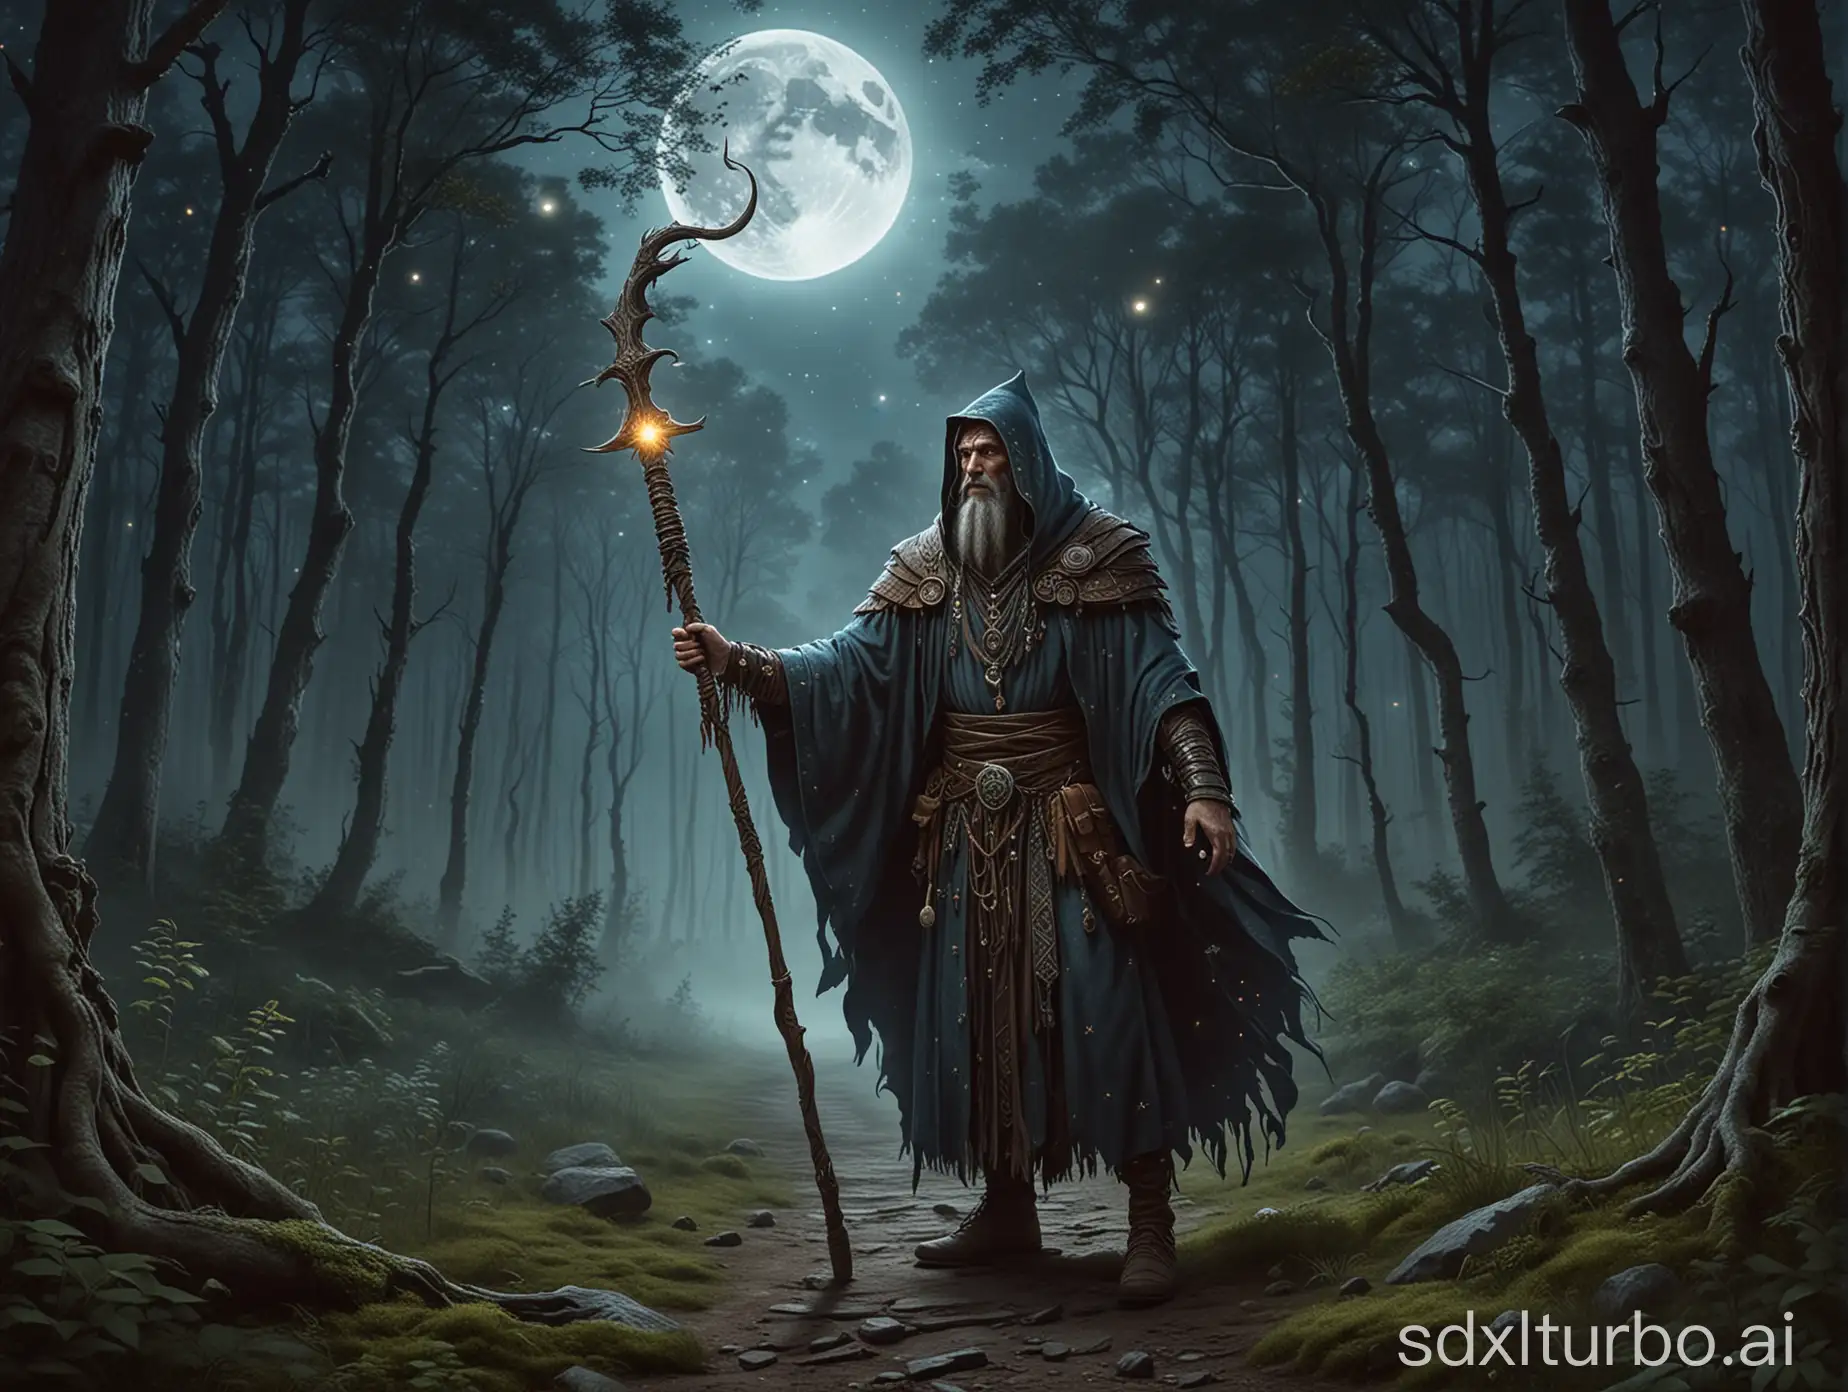 a sorcerer resembling a hatless shaman with his staff and cloak at a crossroads of 4 paths in the middle of a forest with the moon and stars in the sky